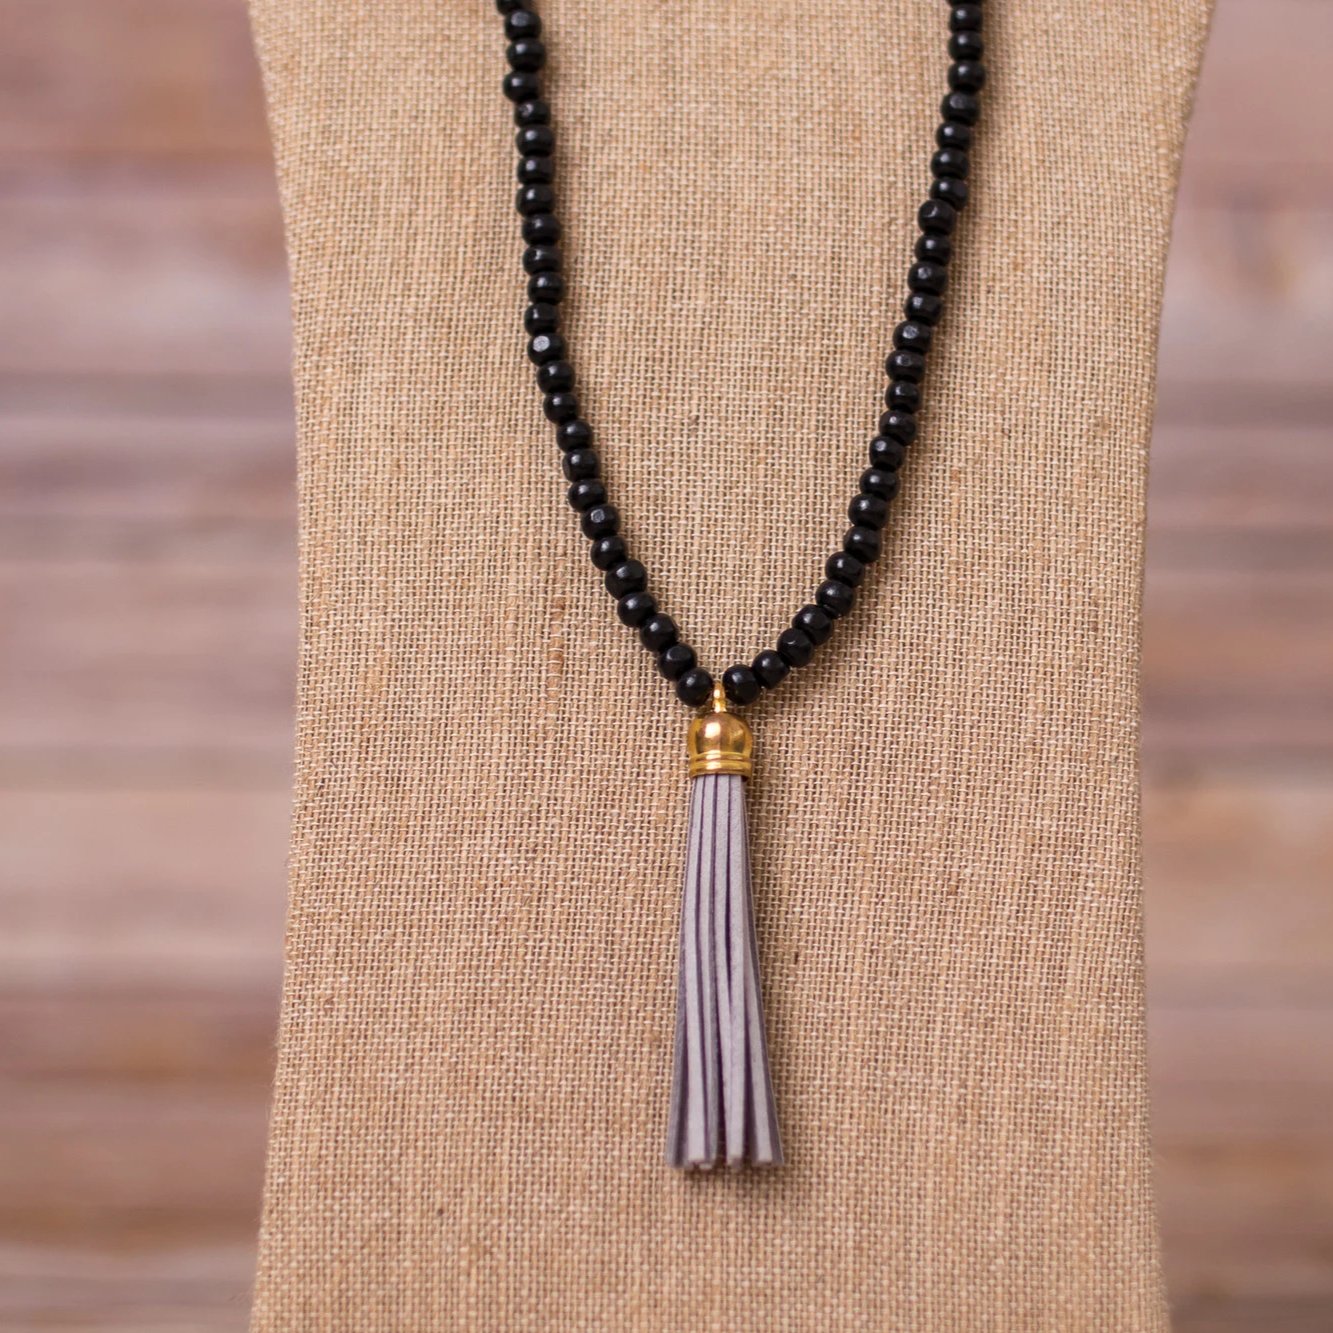 Beaded Necklace with Tassel Pendant